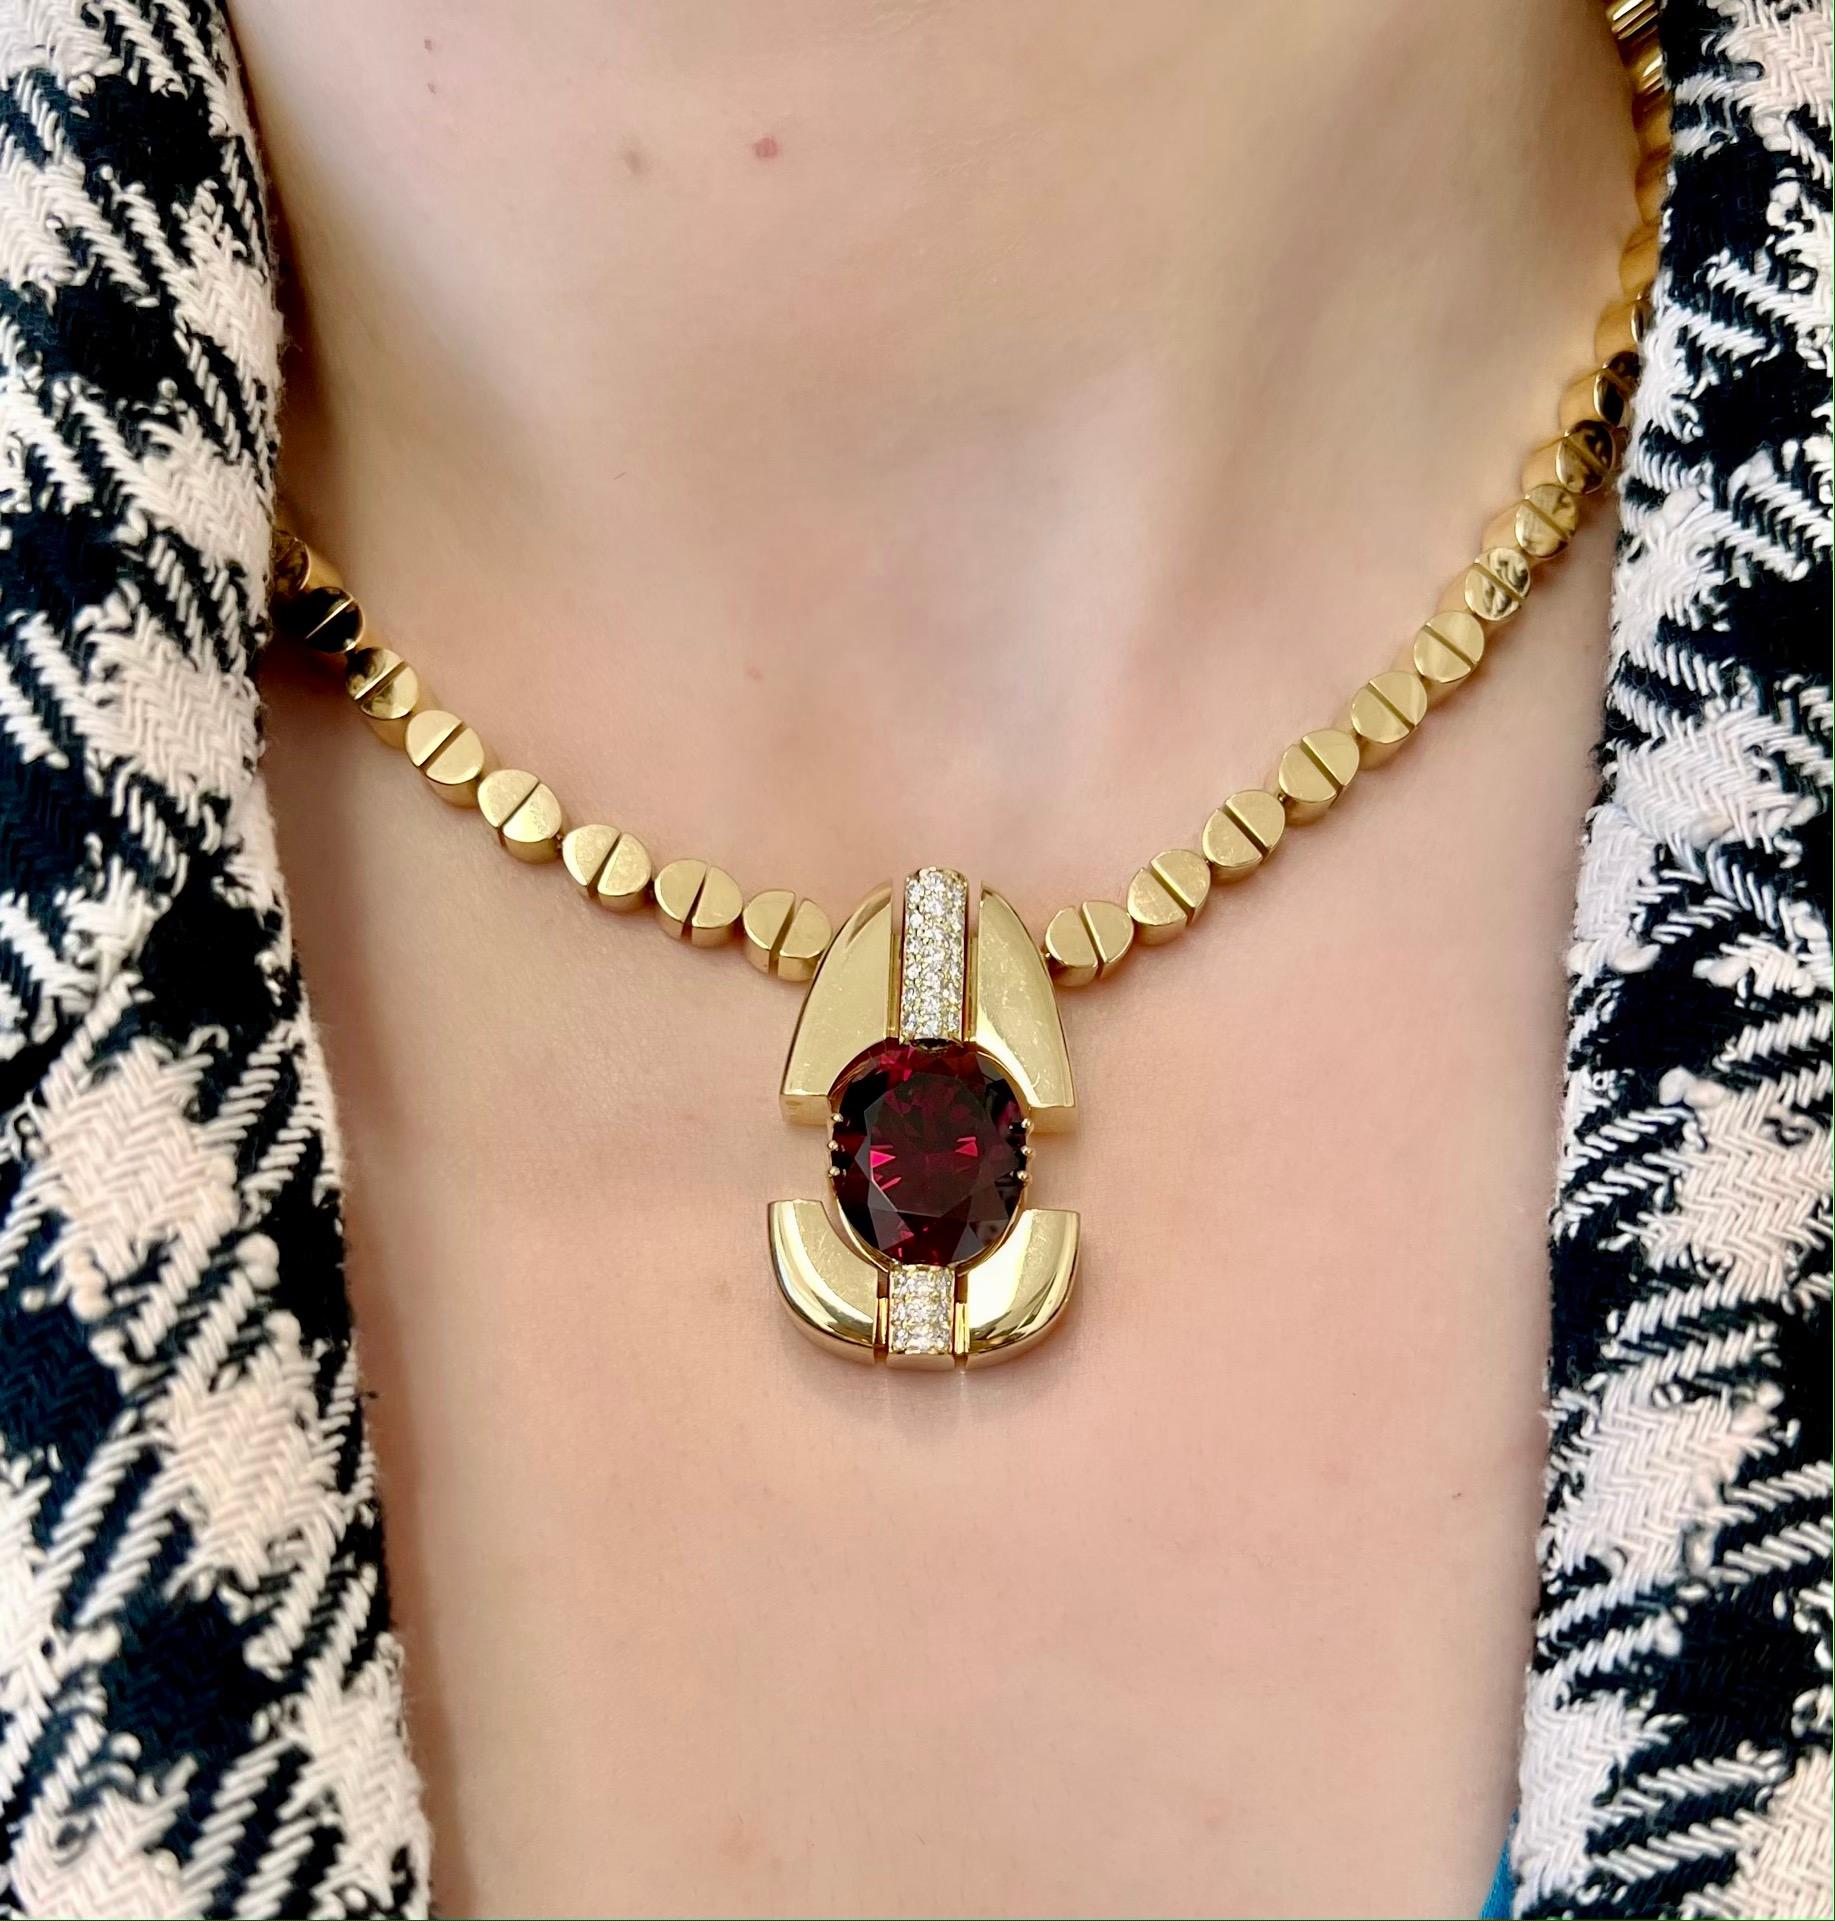 Experience luxury like never before with our unique handcrafted Rhodolite Garnet and Diamond Necklace. The pendant showcases the popular purplish-red Rhodolite garnet, named for its rosy hues in Greek. Designed by David Zoltan, this 18 karat yellow